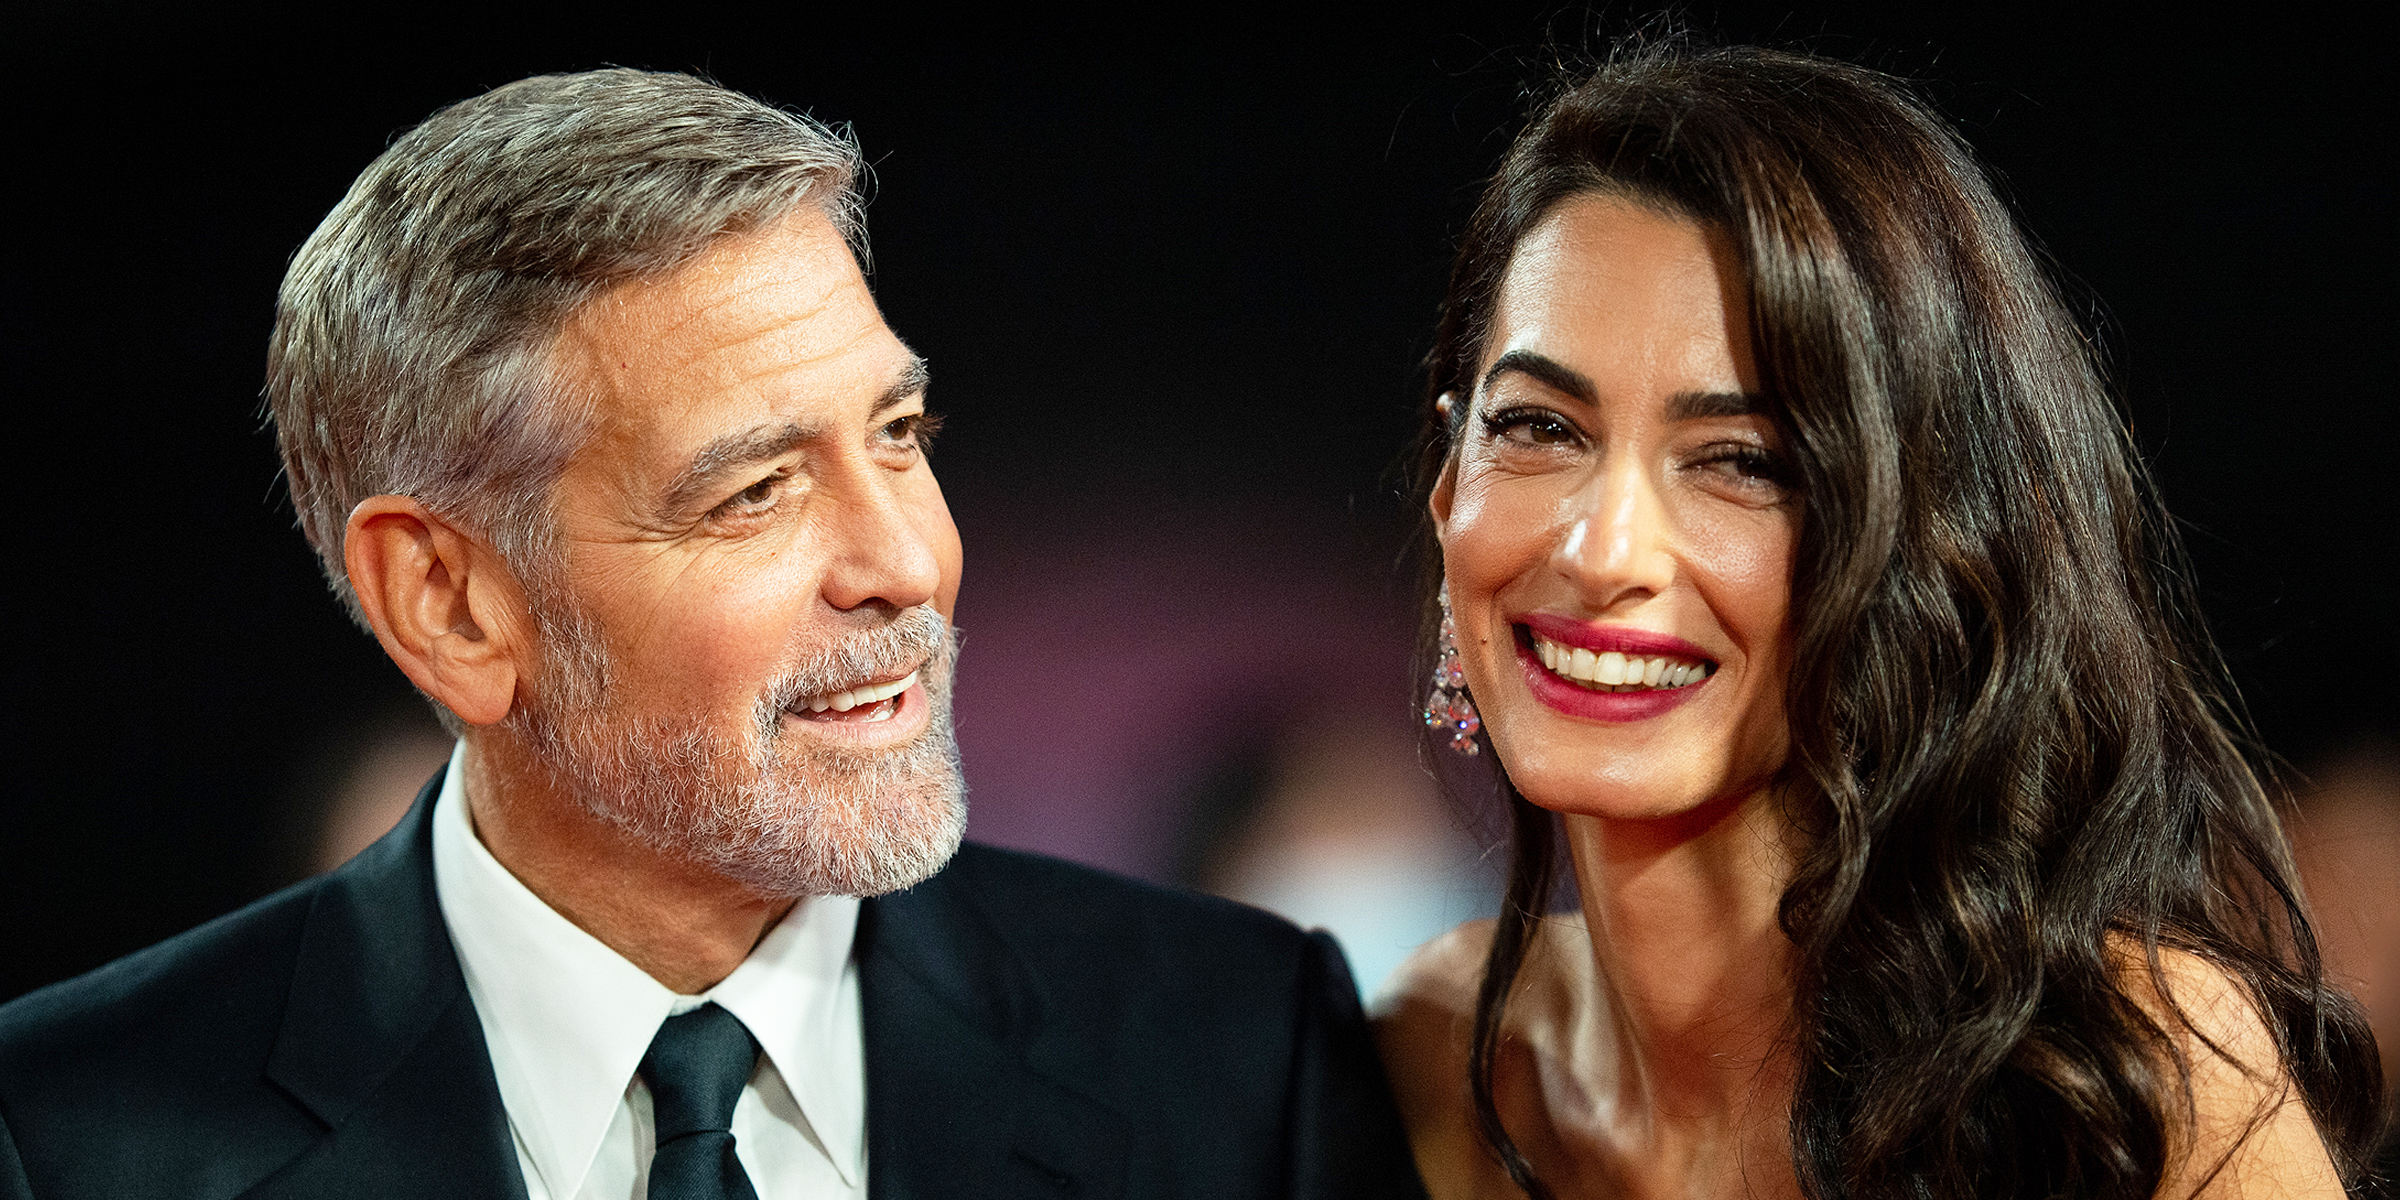 George and Amal Clooney. | Source: Getty Images